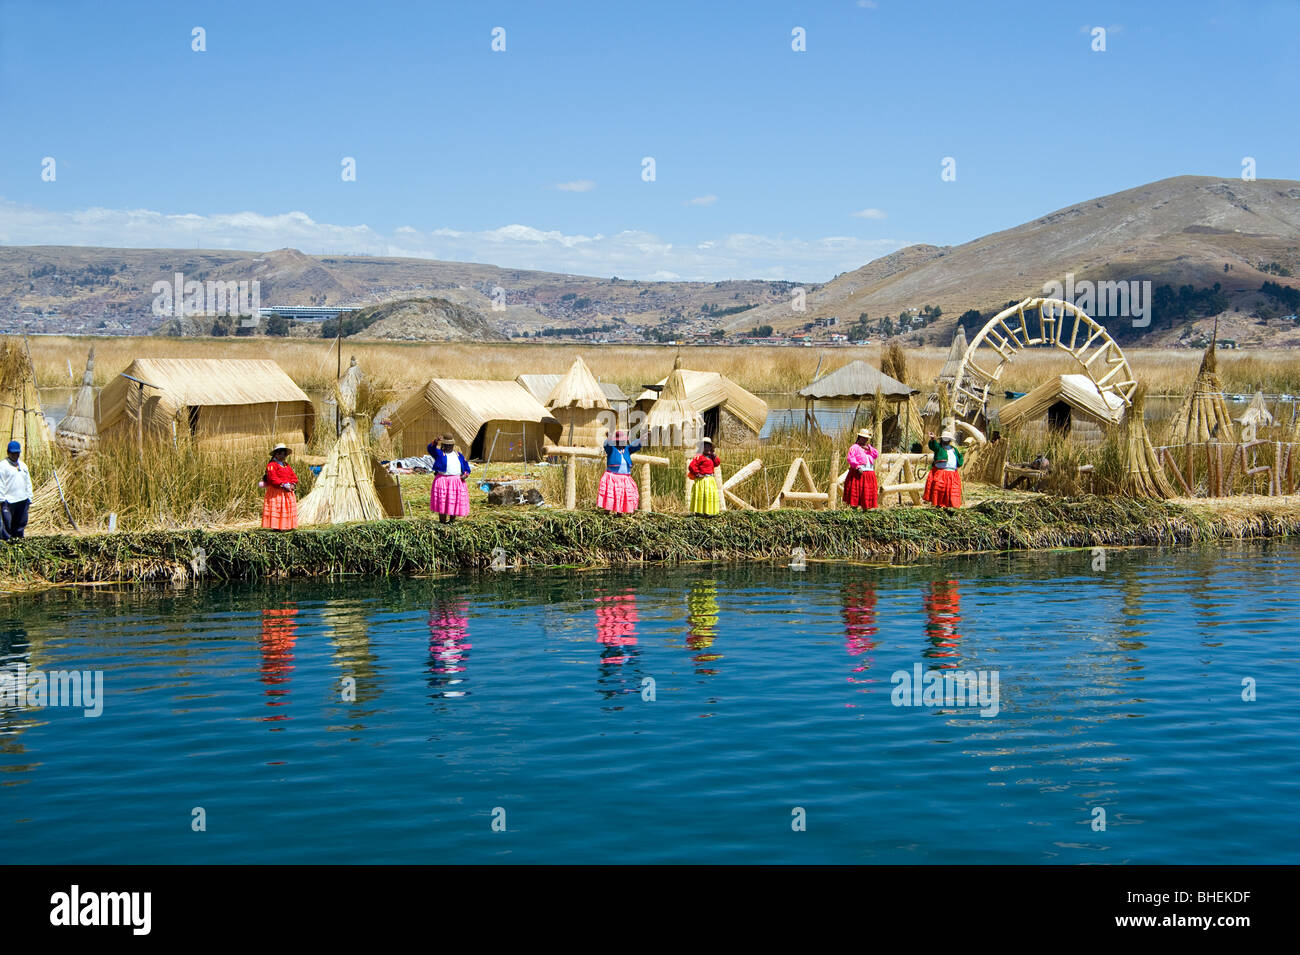 Uros islanders looking for trade from passing tourist boats, Lake Titicaca, Peru Stock Photo